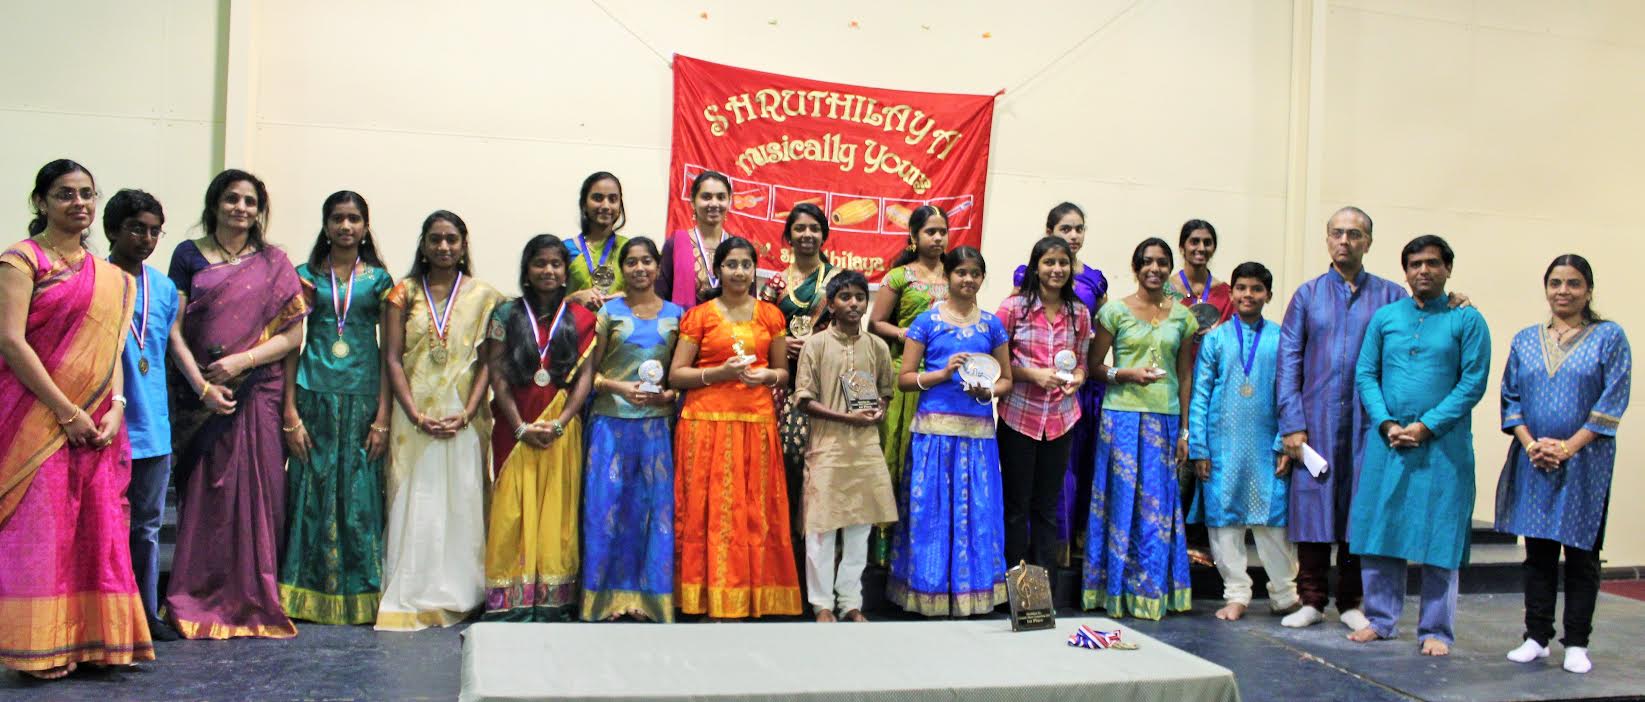 Shruthilaya holds annual Carnatic music competition NRI Pulse